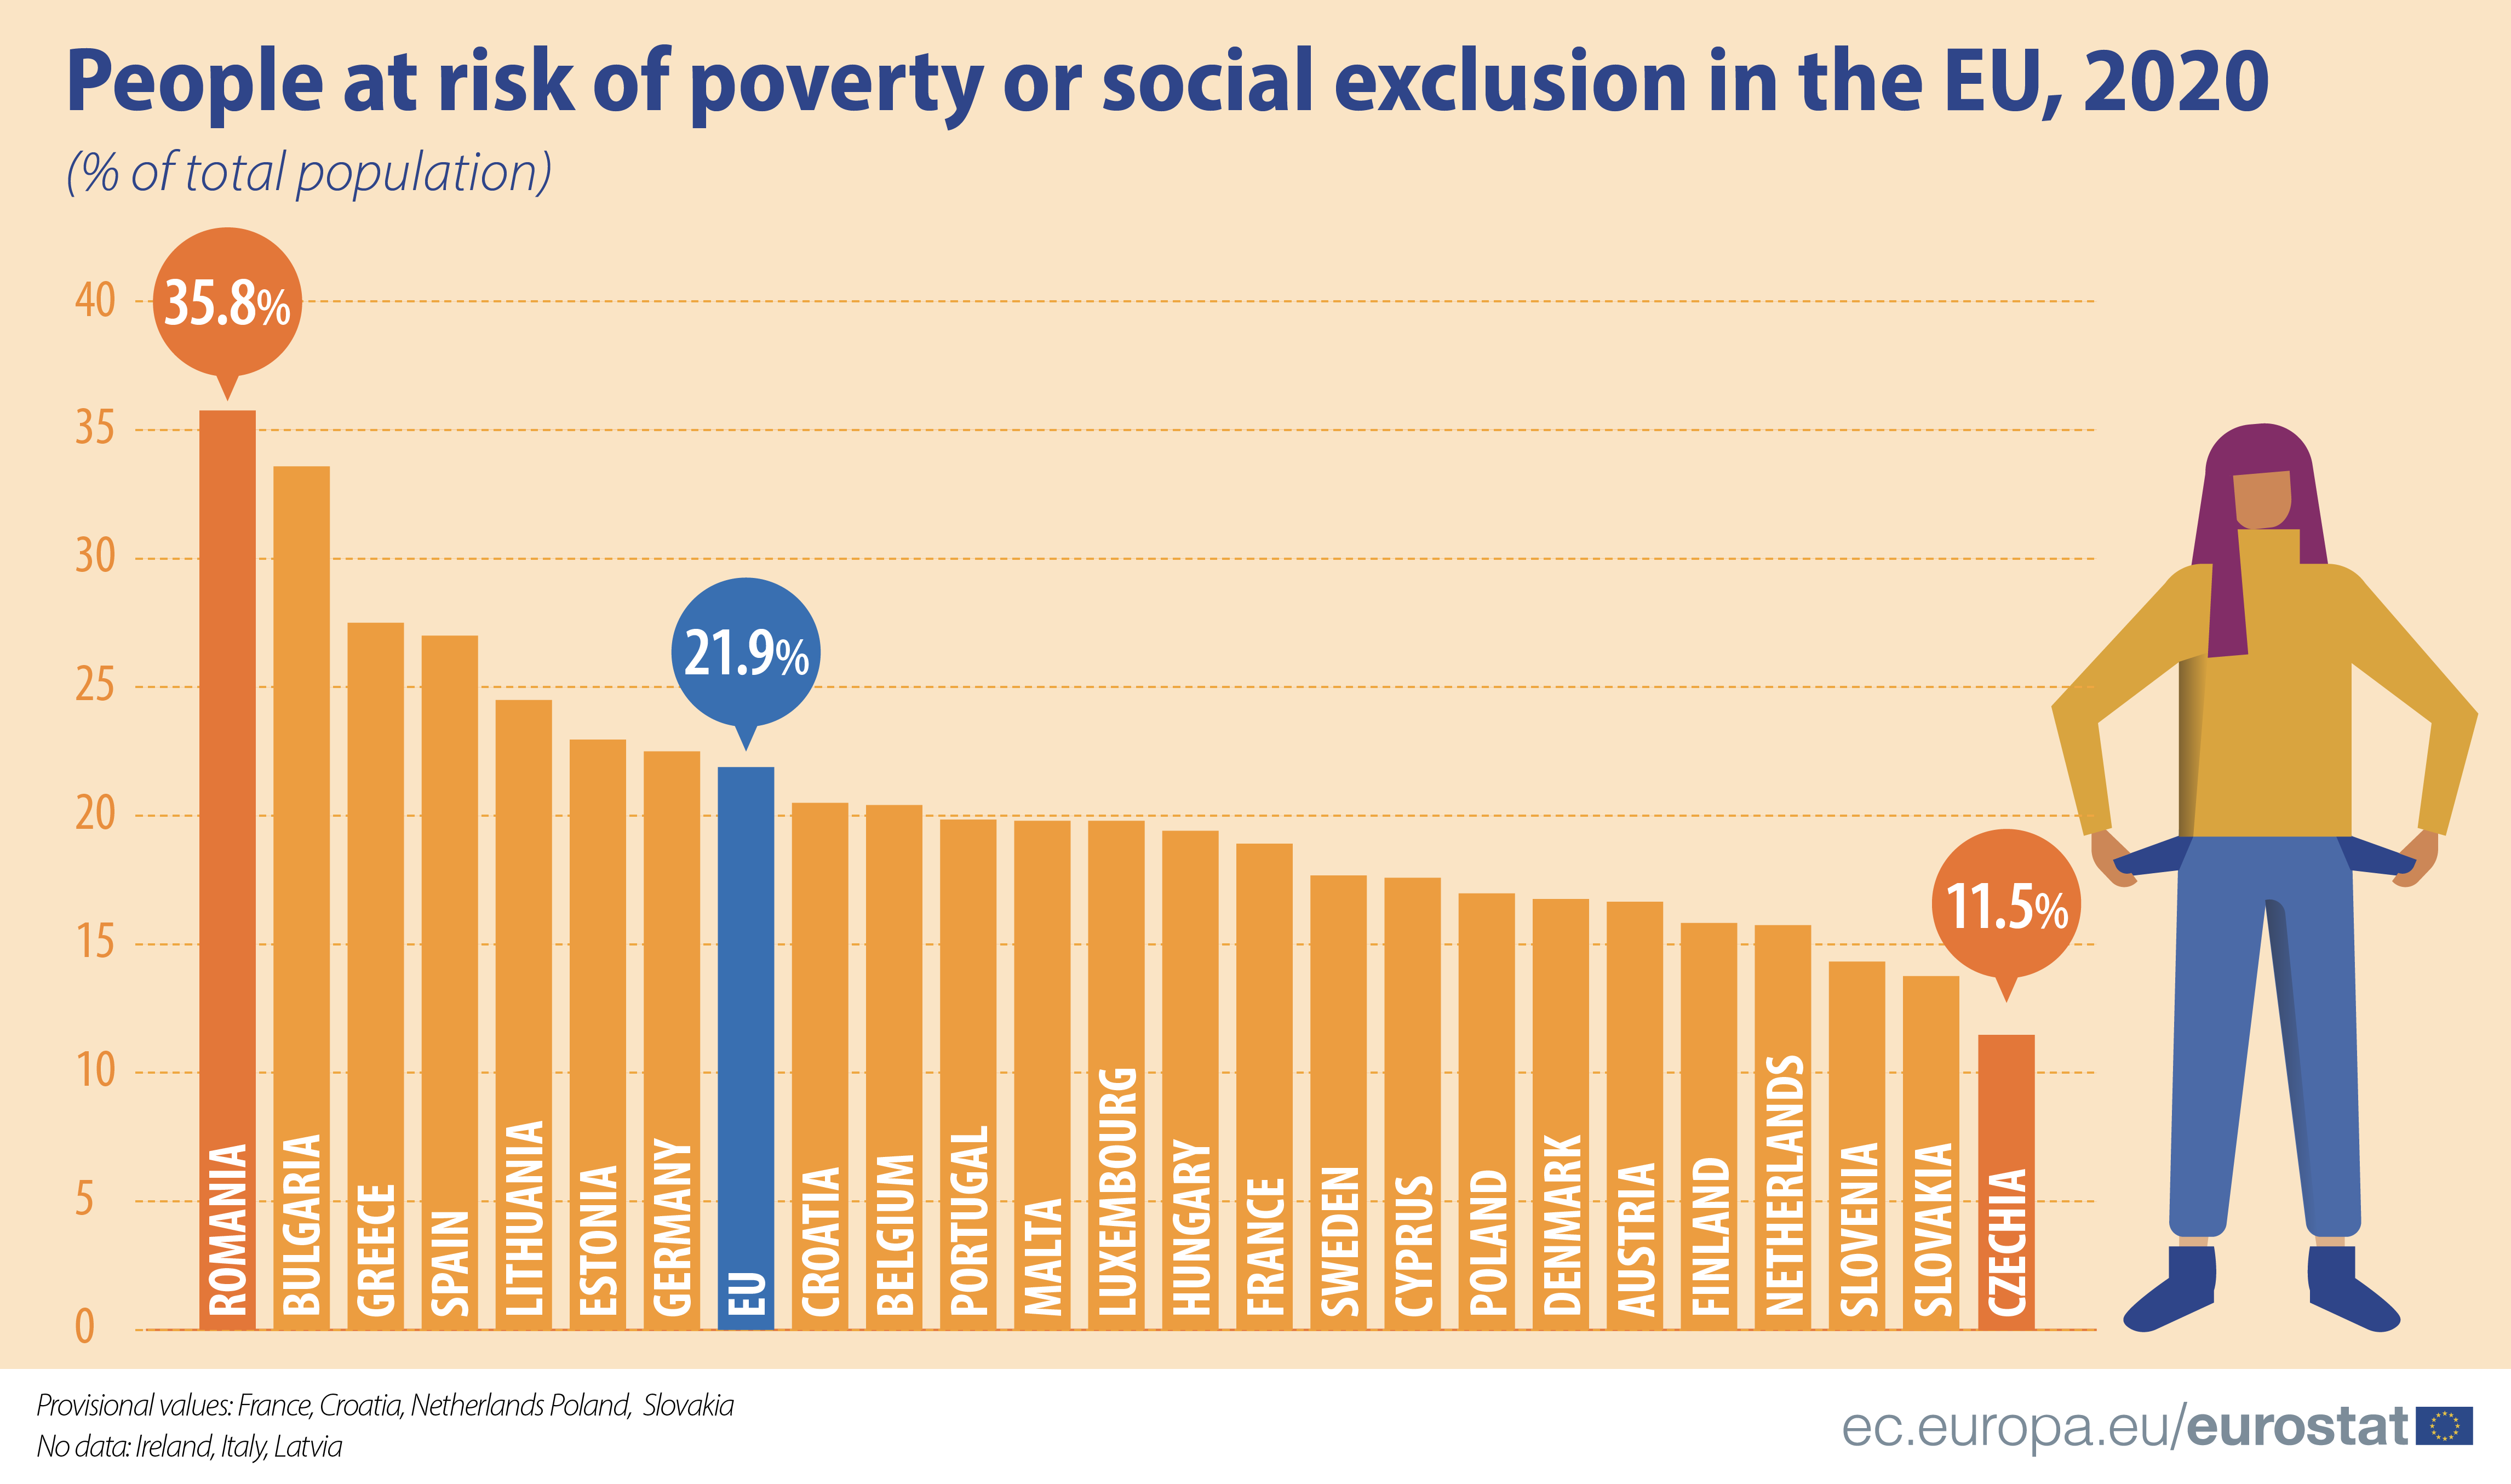 One in five people in the EU at risk of poverty or social exclusion